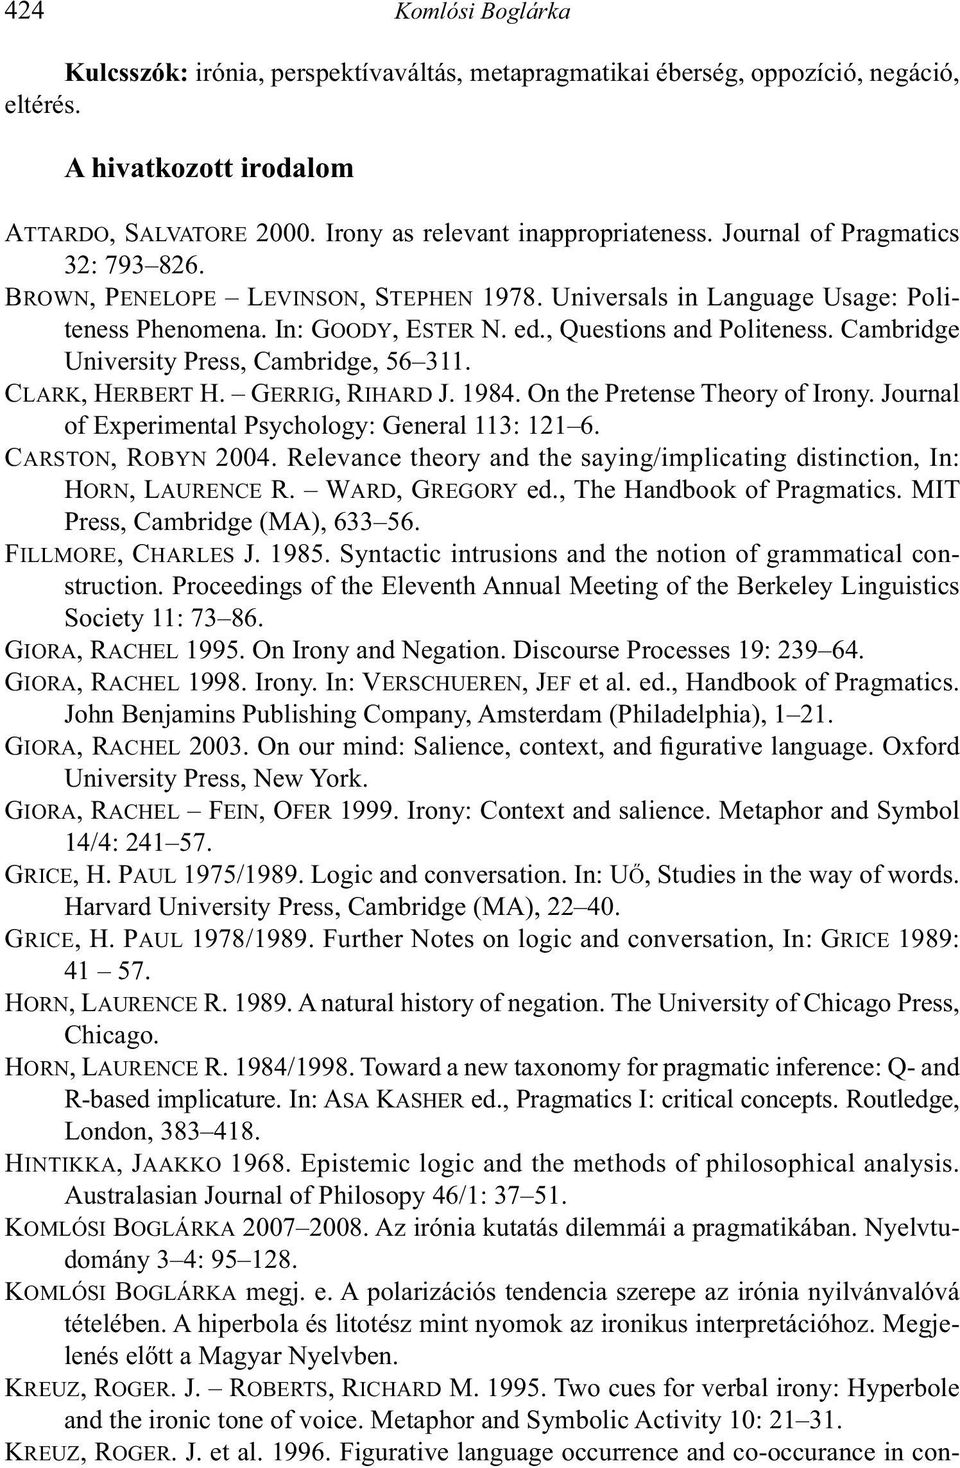 Proceedings of the Eleventh Annual Meeting of the Berkeley Linguistics GIORA, RACHEL GIORA, RACHEL VERSCHUEREN, JEF GIORA, RACHEL GIORA, RACHEL FEIN, OFER 14/4: 241 57. GRICE, H. PAUL GRICE, H.